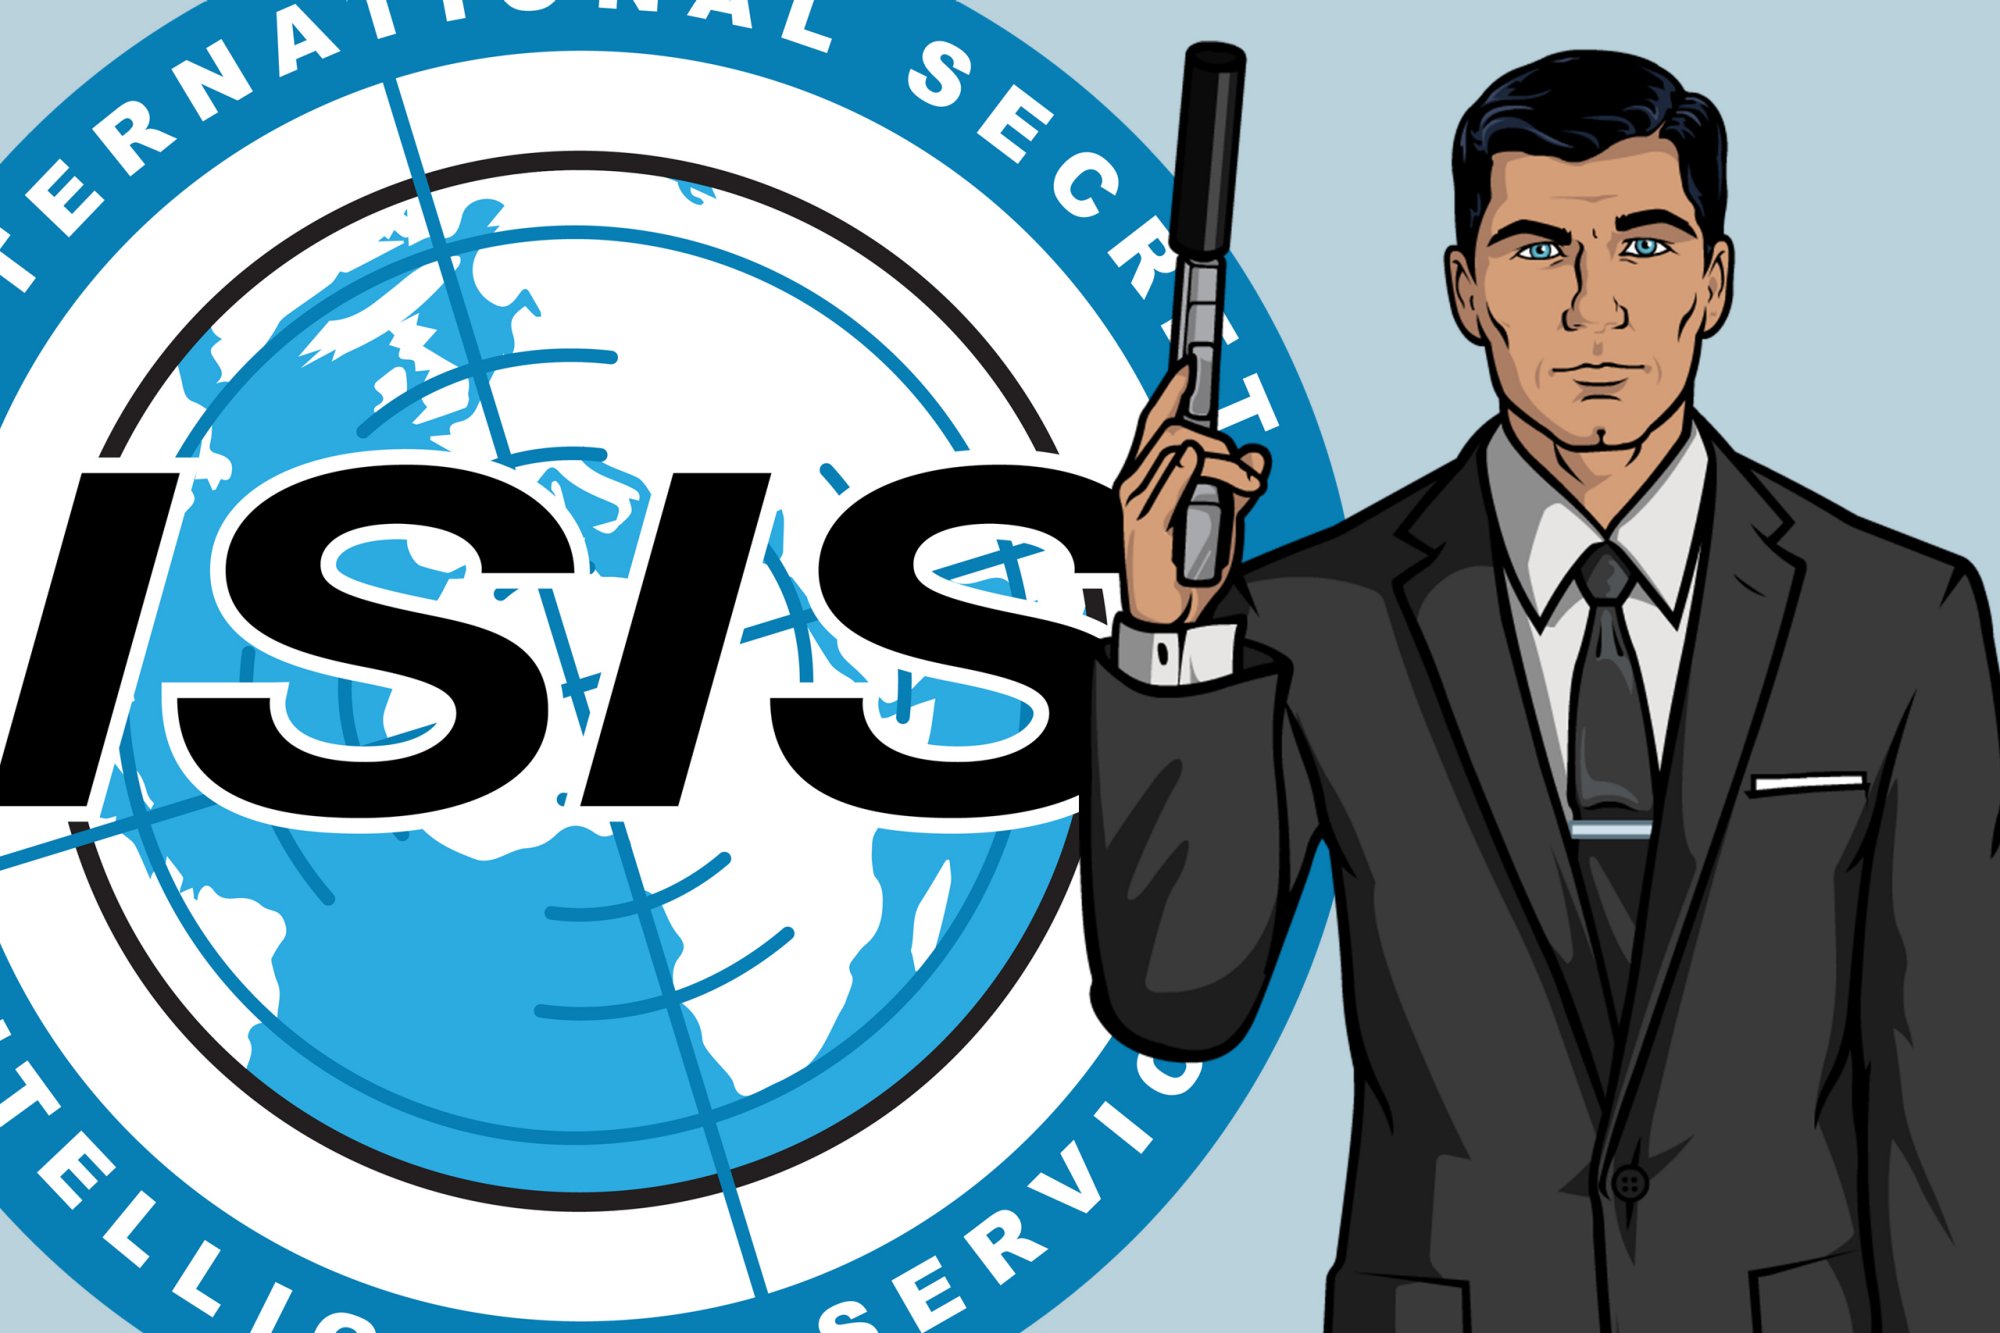 http://cdn.thedailybeast.com/content/dailybeast/articles/2014/10/10/archer-drops-isis-the-fx-series-dumps-the-spy-org-s-name-in-light-of-recent-events/jcr:content/image.img.2000.jpg/1413034195030.cached.jpg